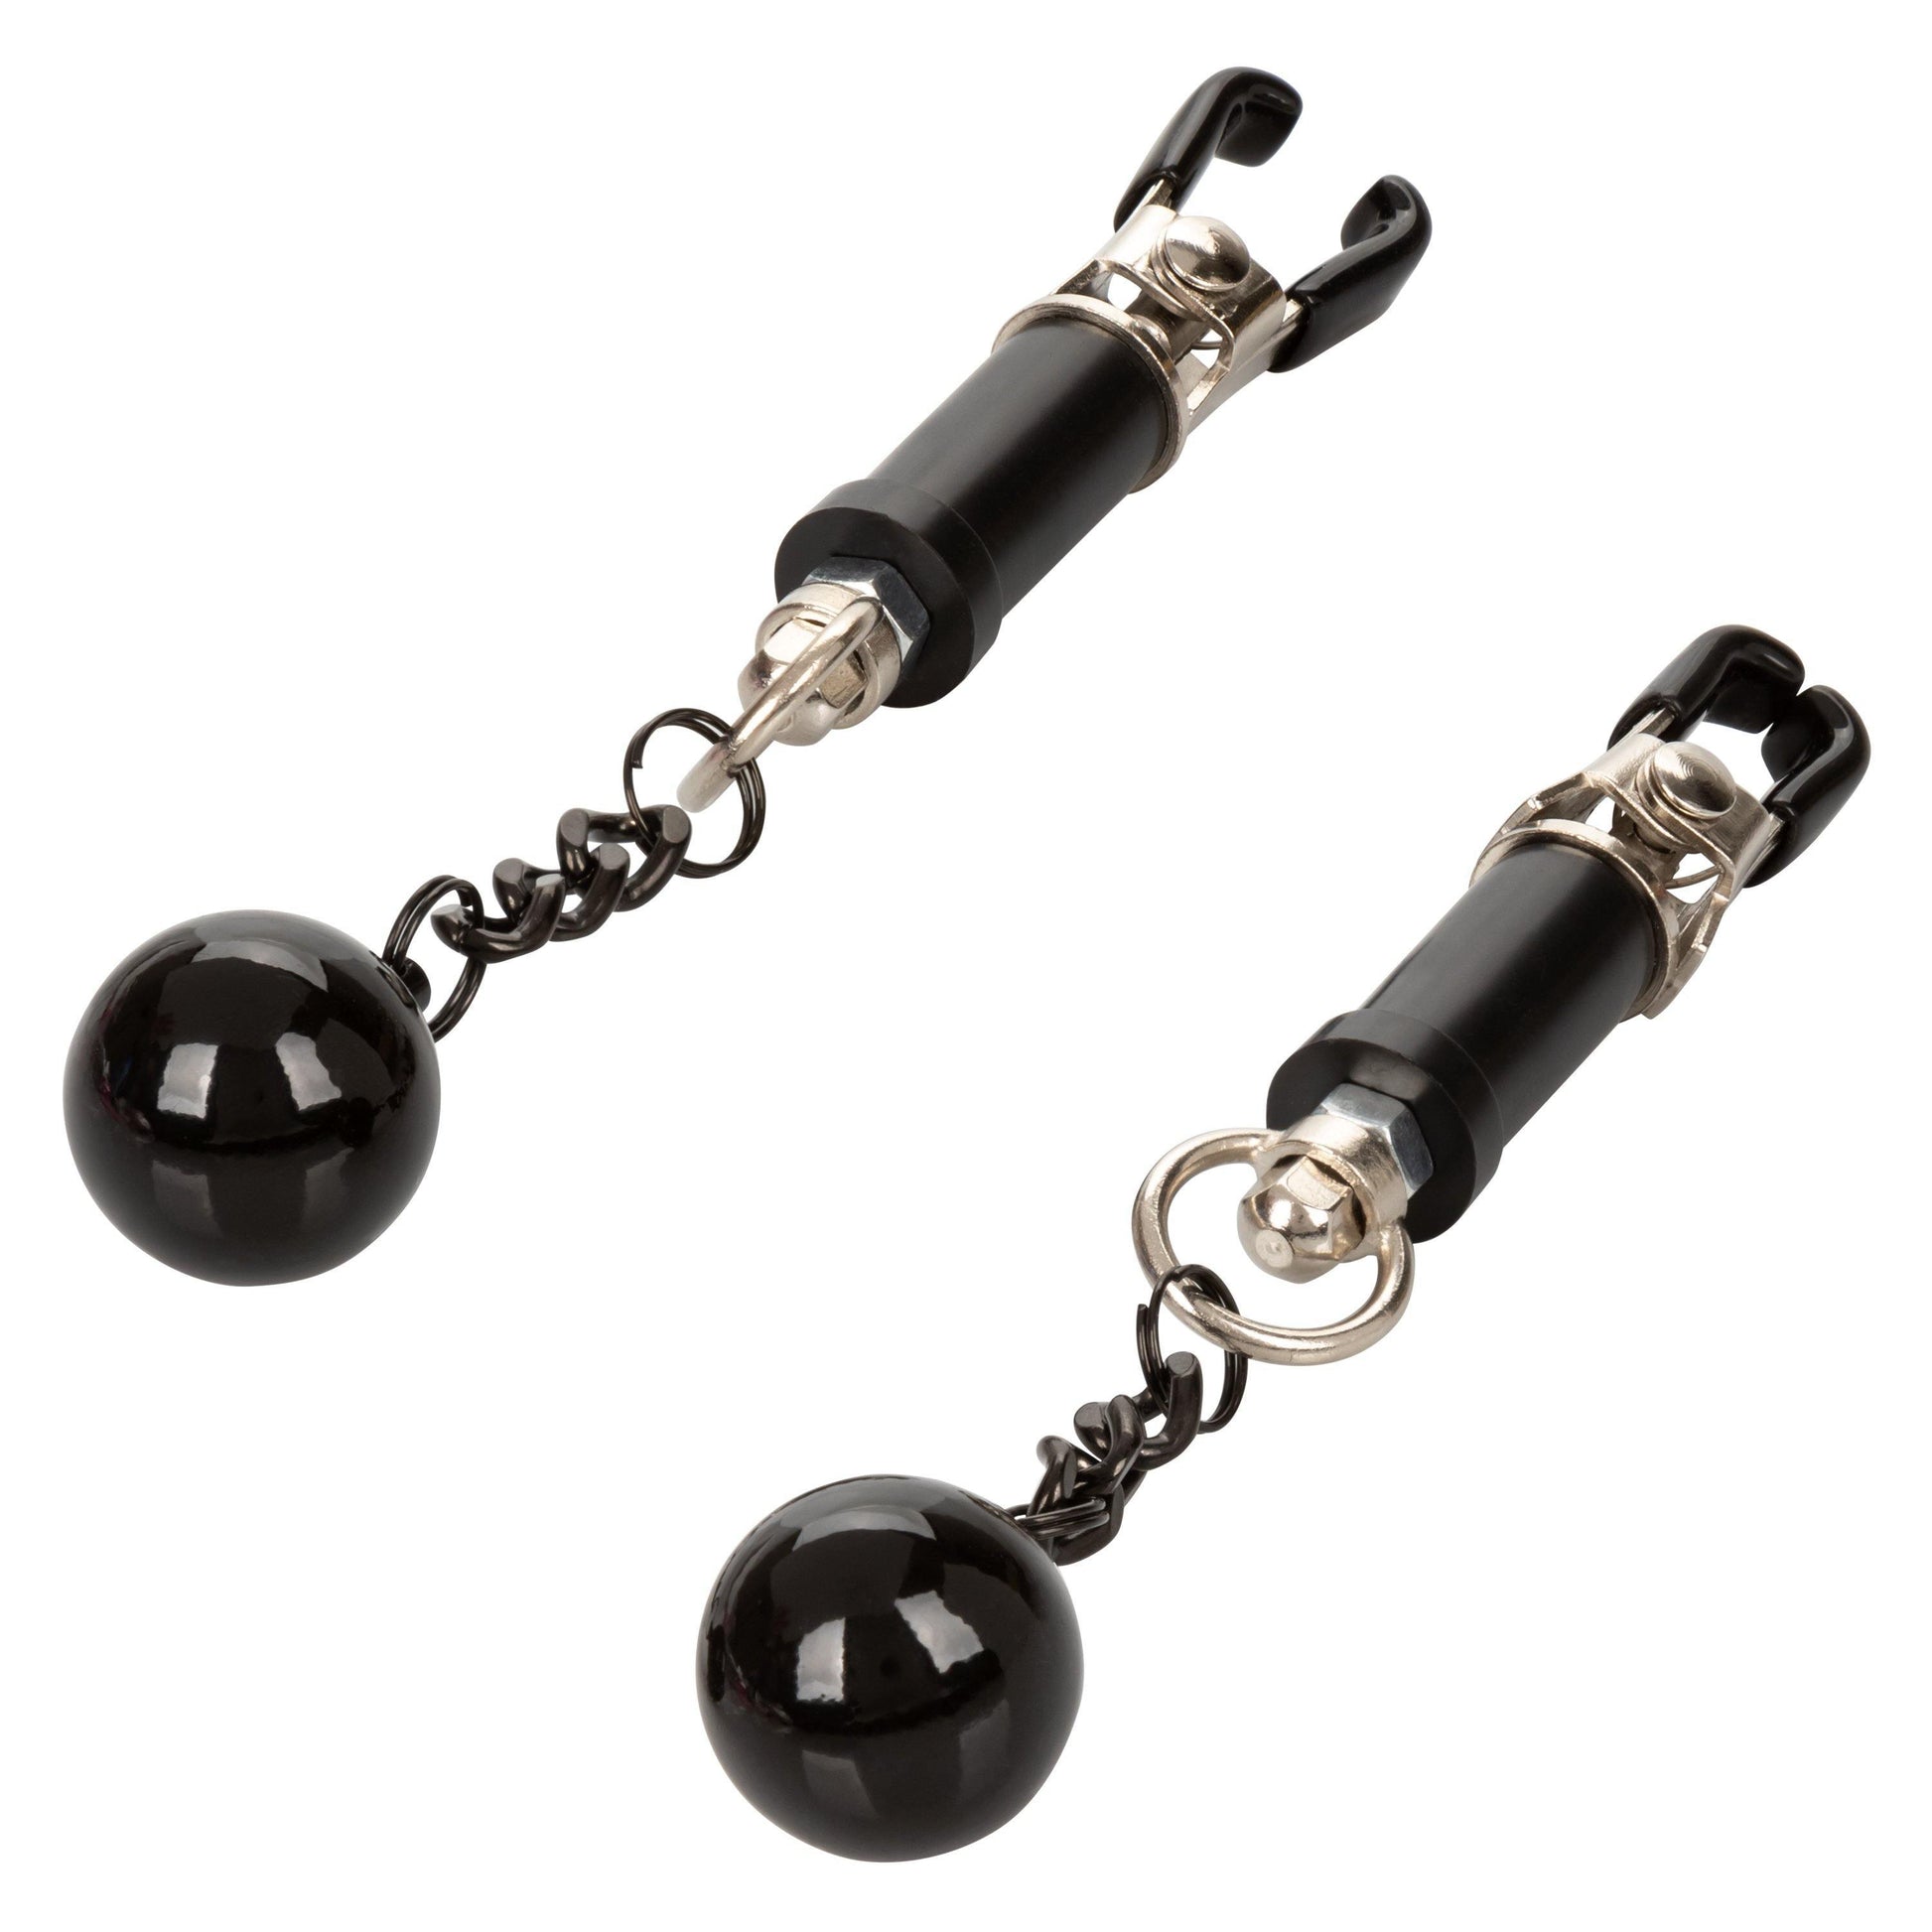 Nipple Grips Weighted Twist Nipple Clamps - My Sex Toy Hub